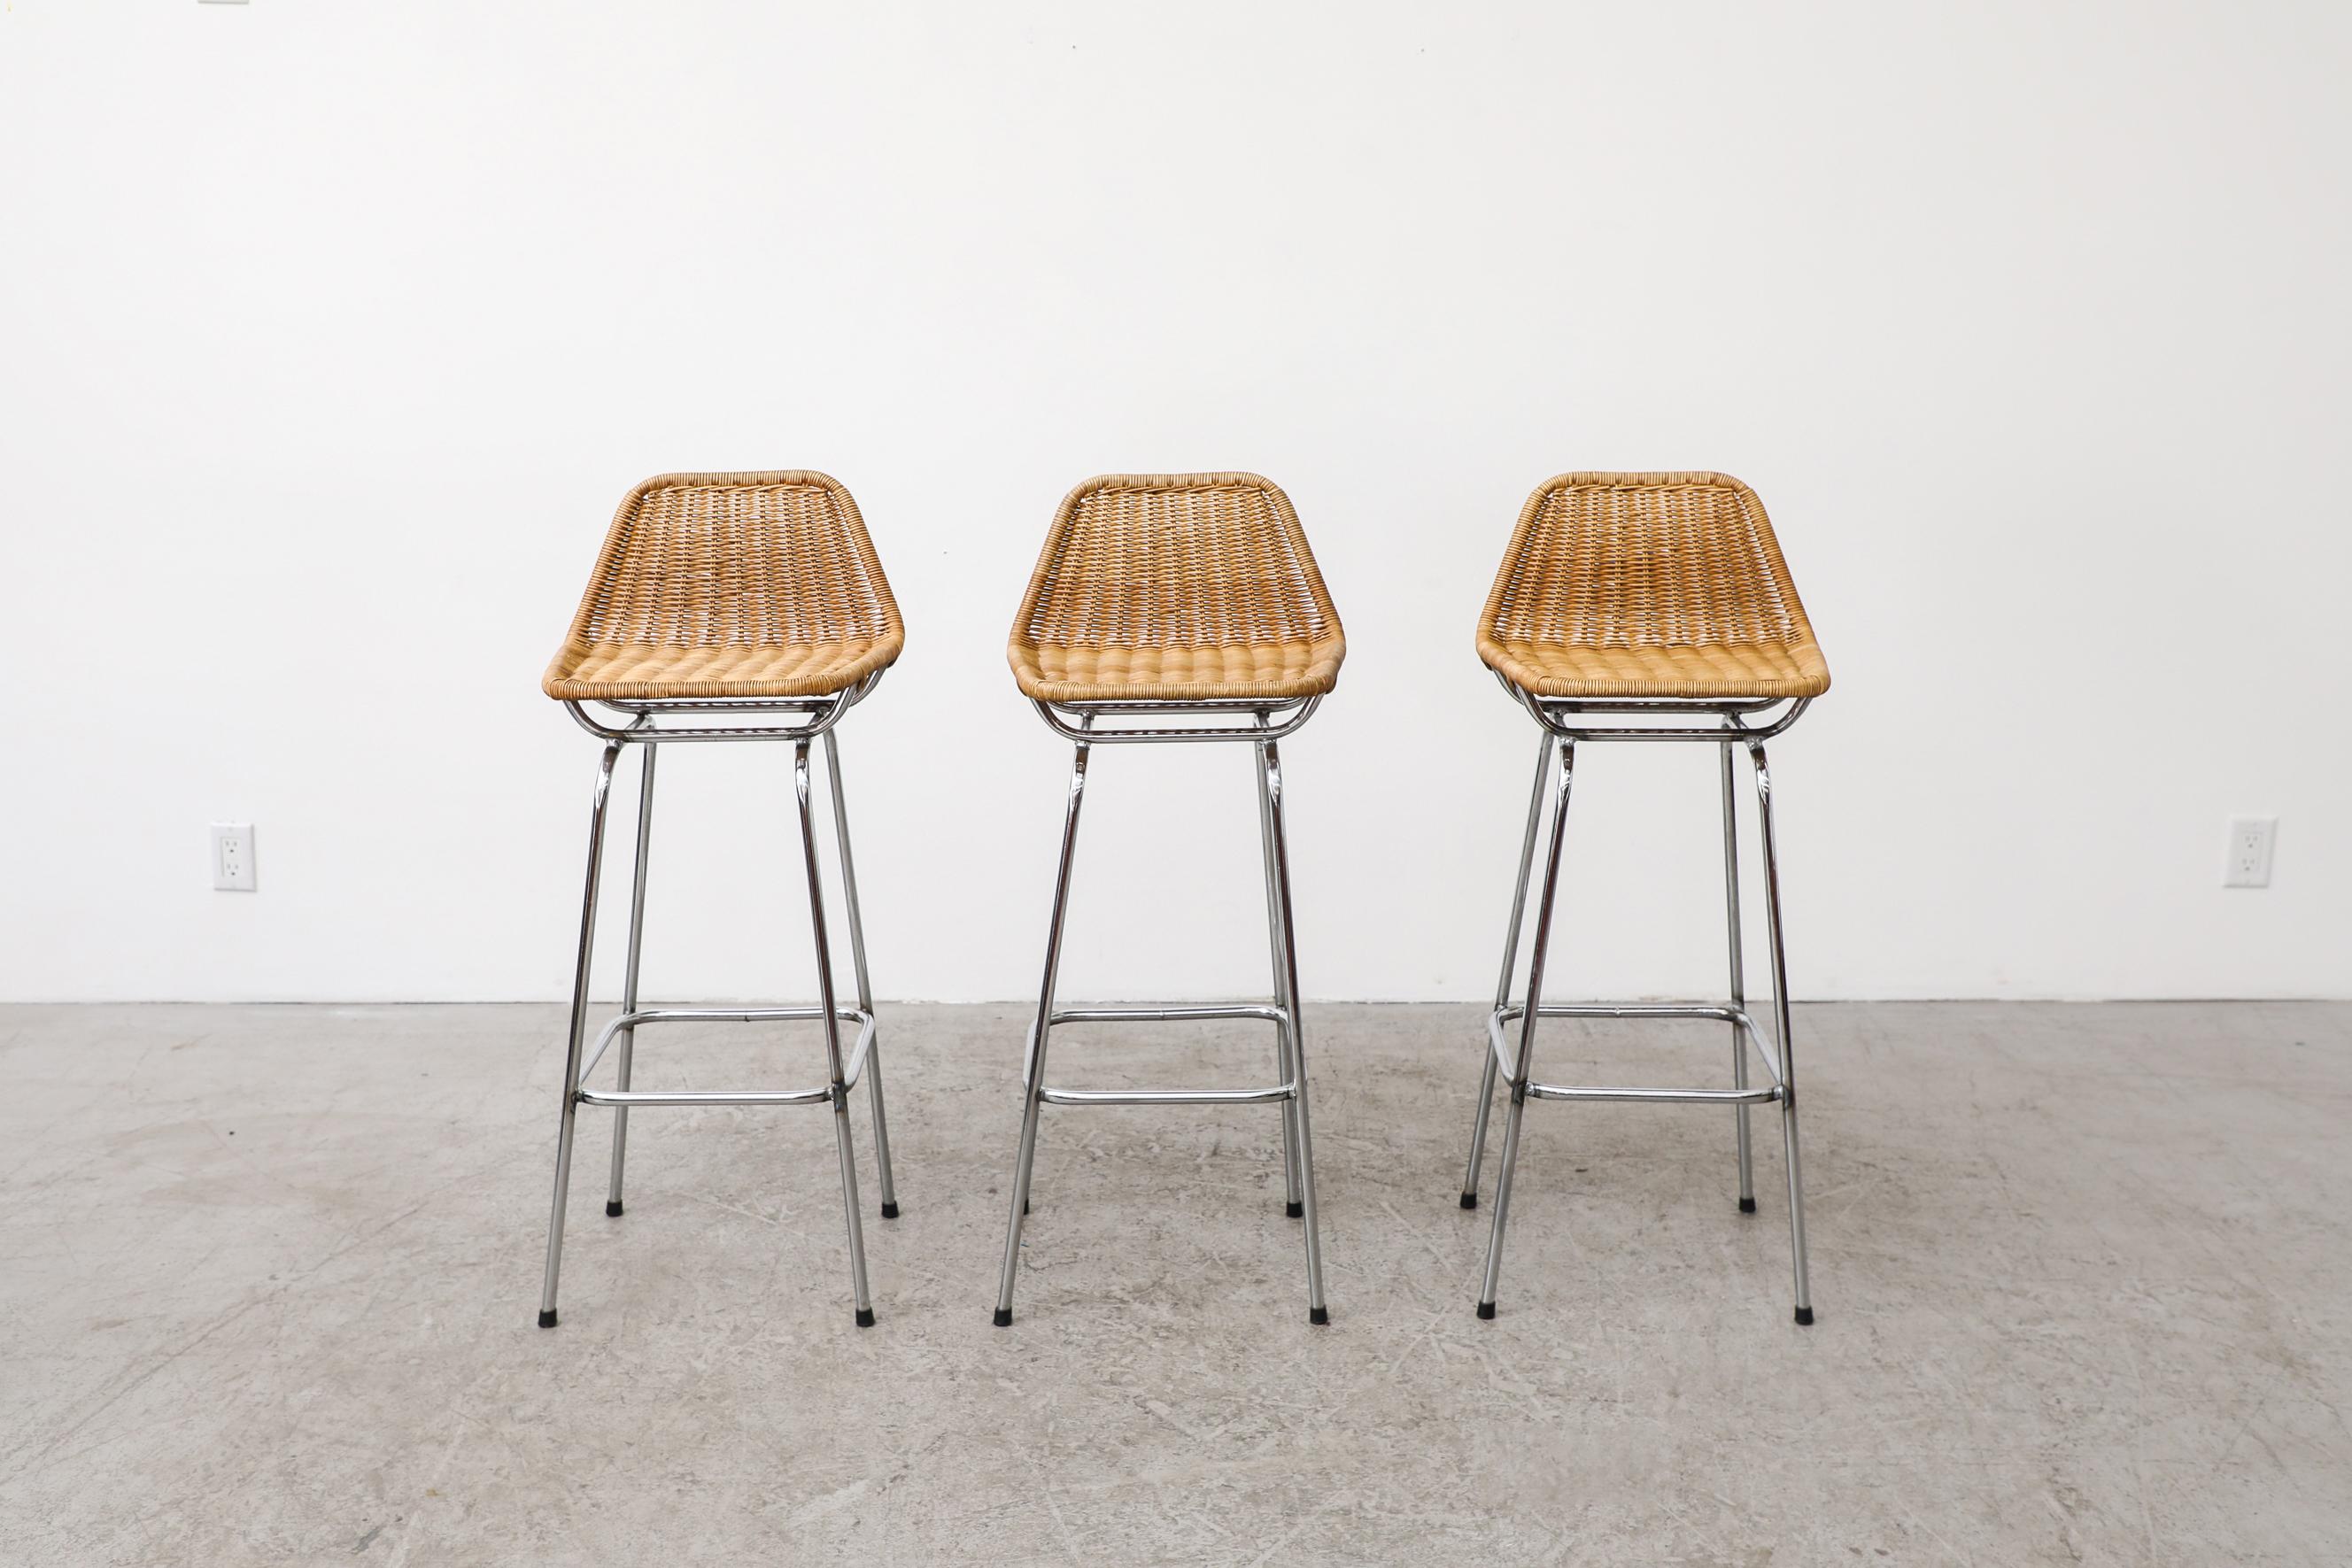 Charlotte Perriand style wicker bar stools by Dirk van Sliedregt for Rohe Noordwolde. These stools have chrome legs with woven wicker seats and angled backrest. In original condition with visible wear consistent with their age and use. Sold as a set